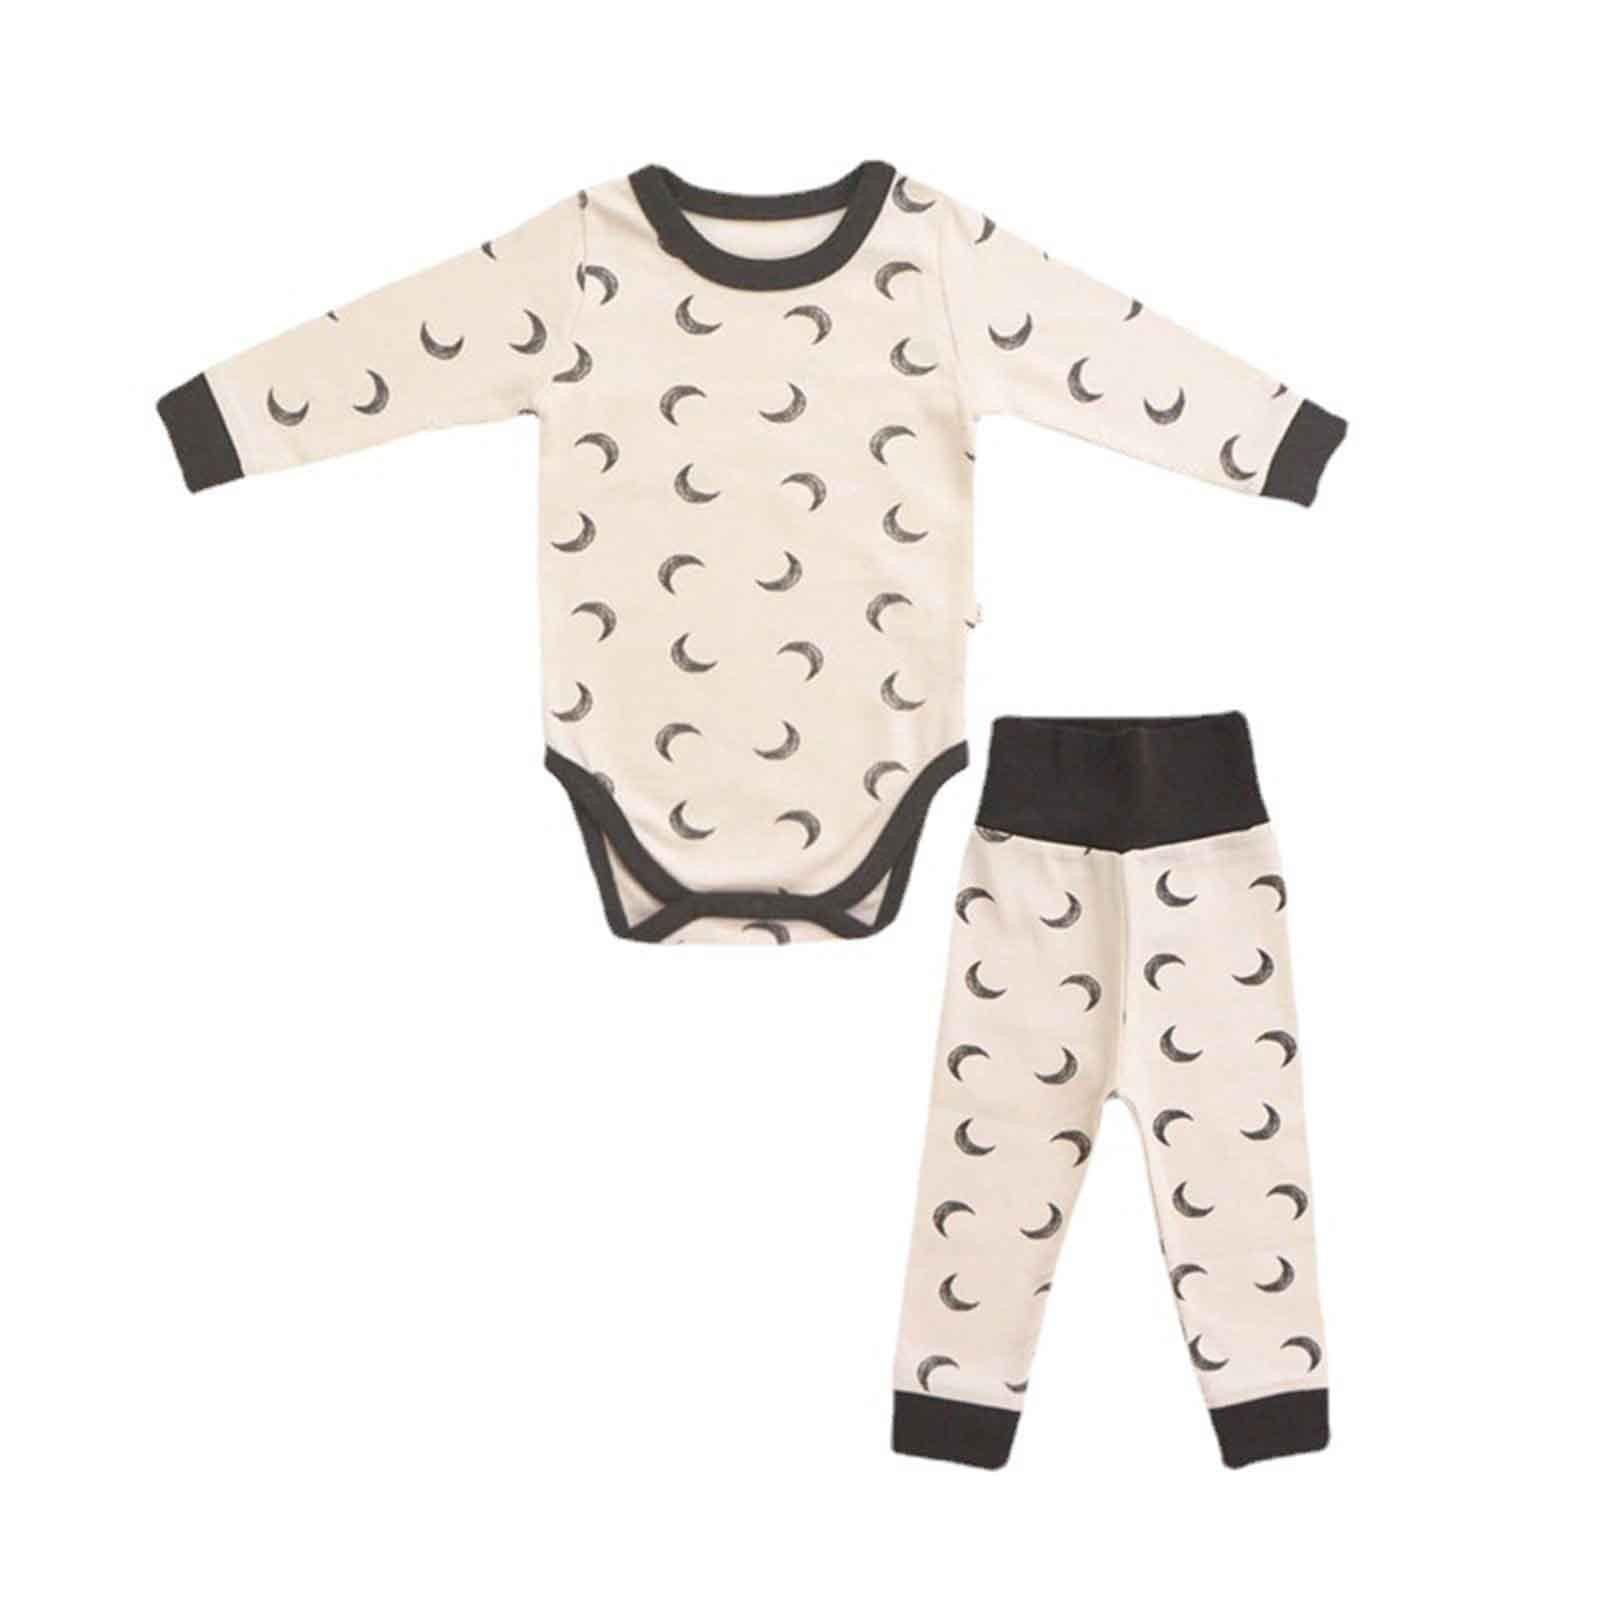 Bnwani Infant Clothes Sleeve Cotton Long Spring Crawling Suit Children ...